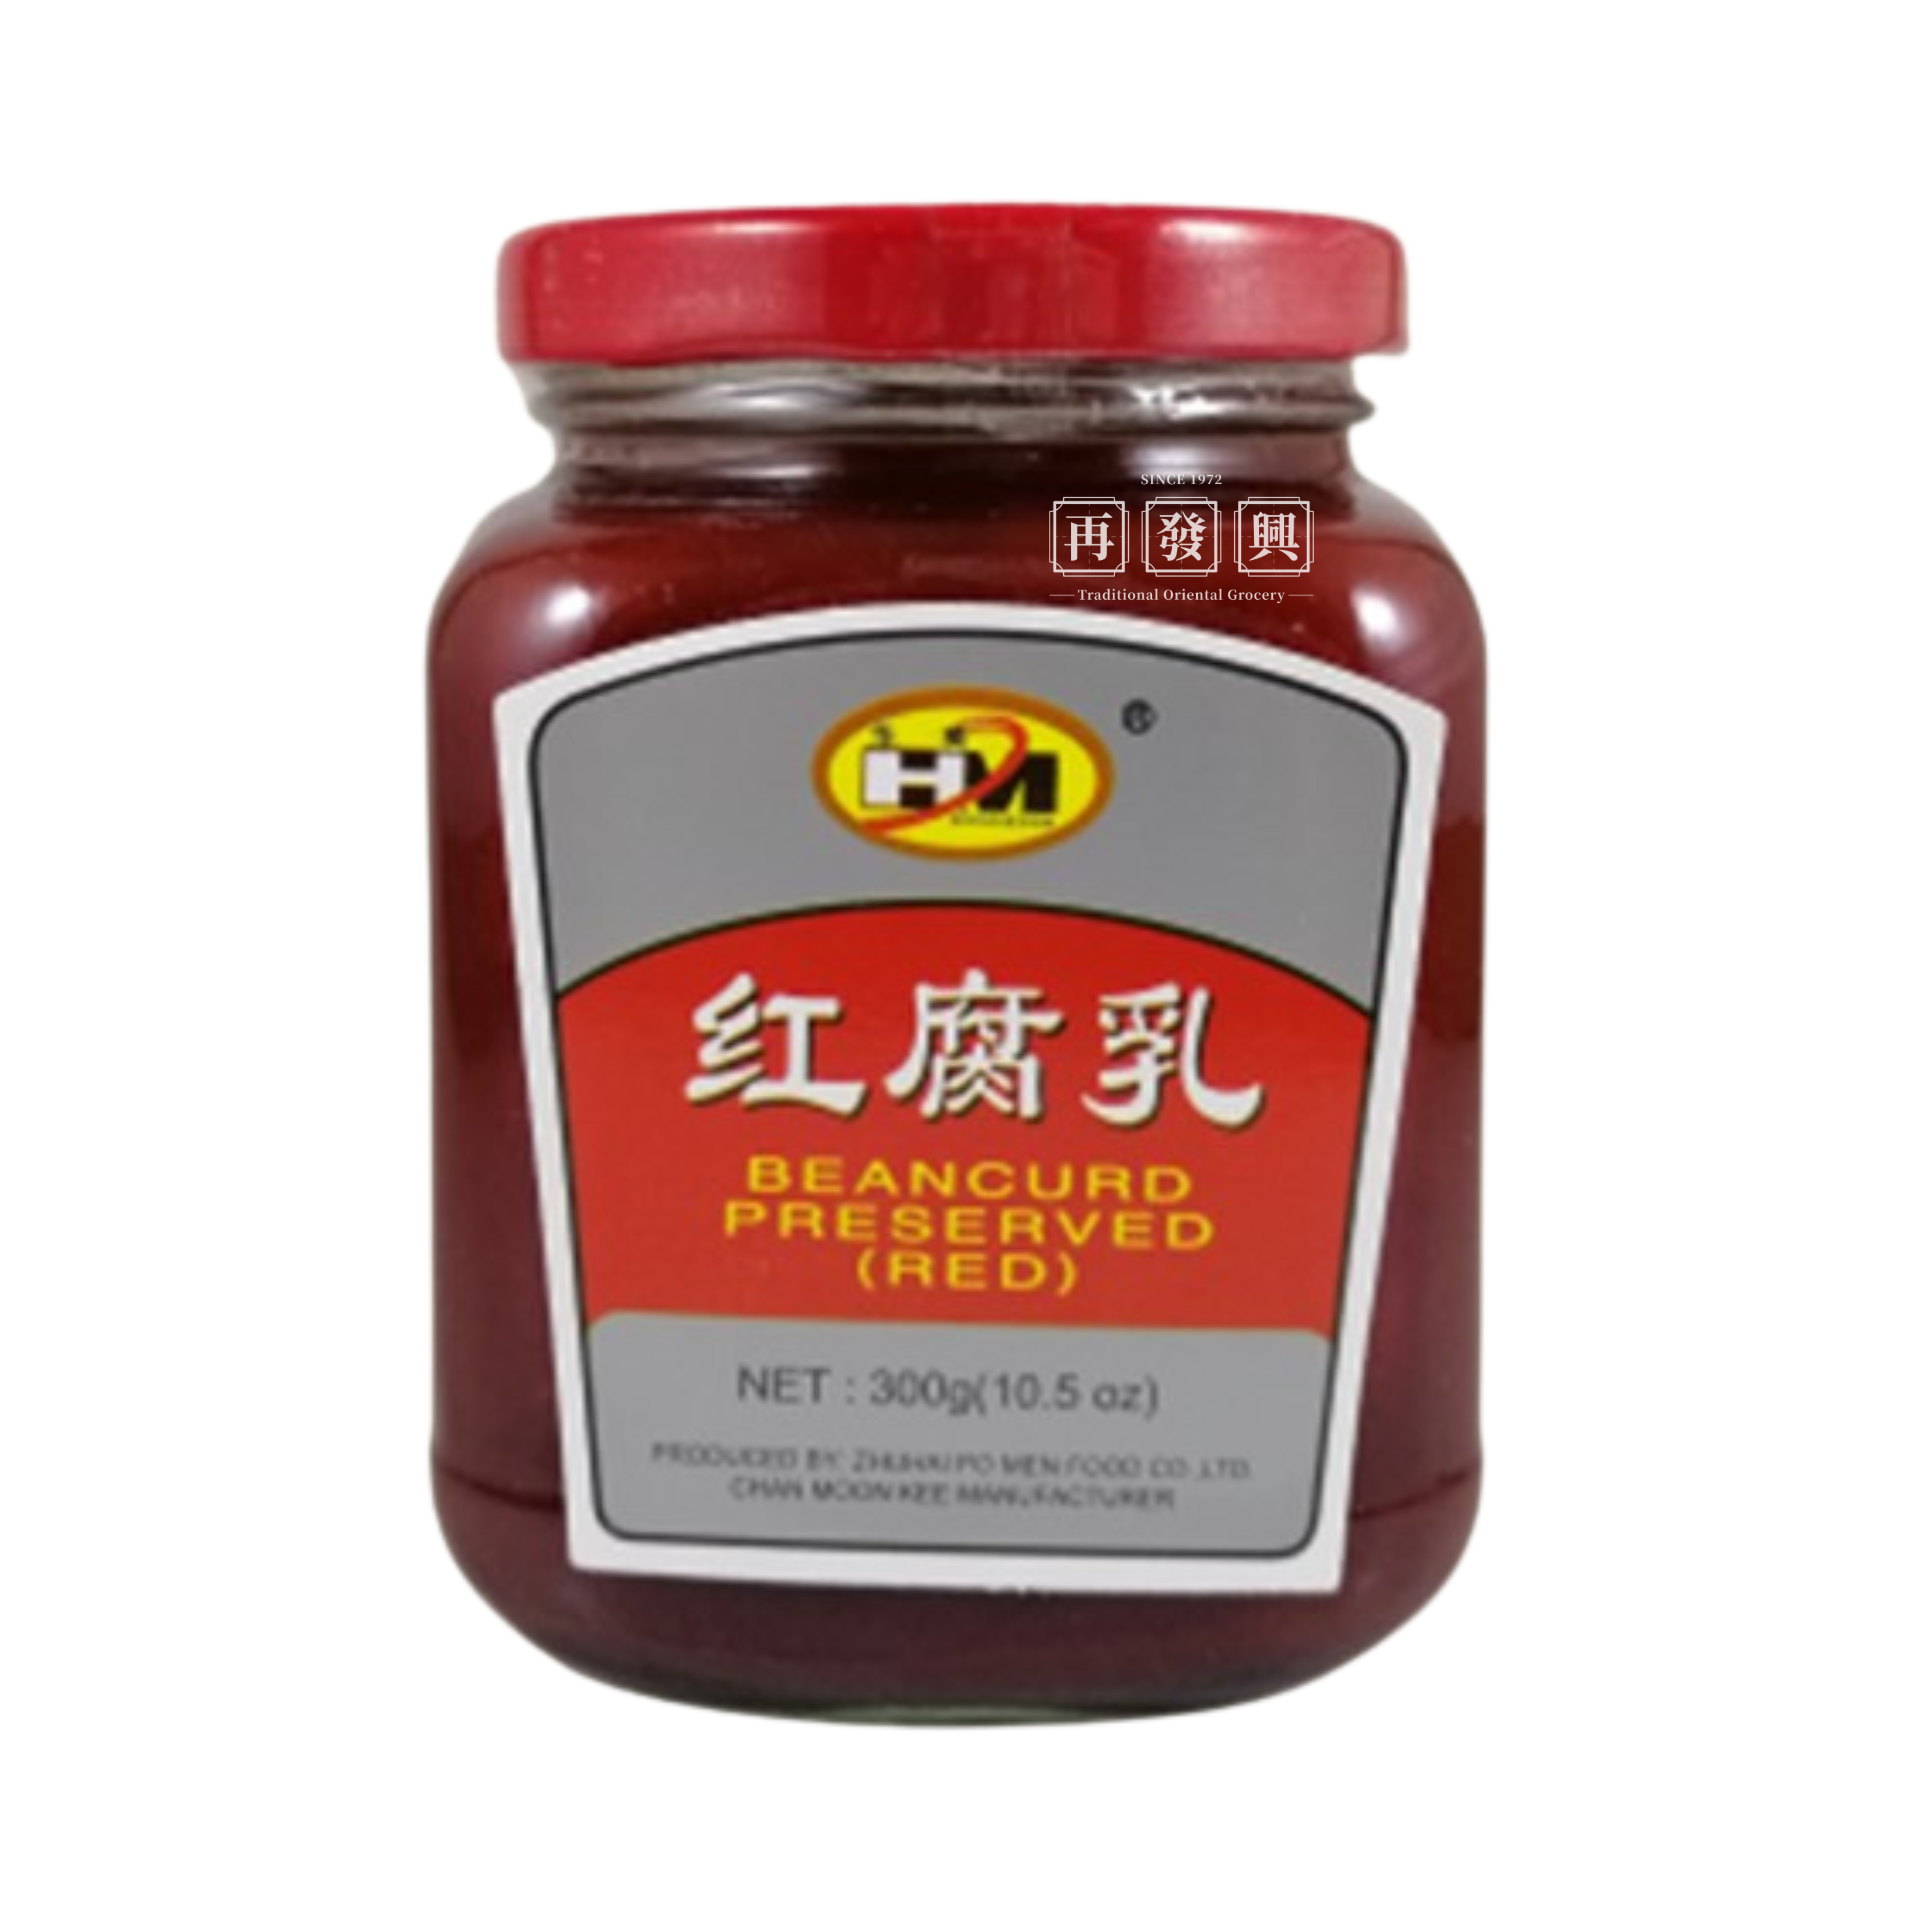 HM Preserved Red Bean Curd 300g 华美红腐乳